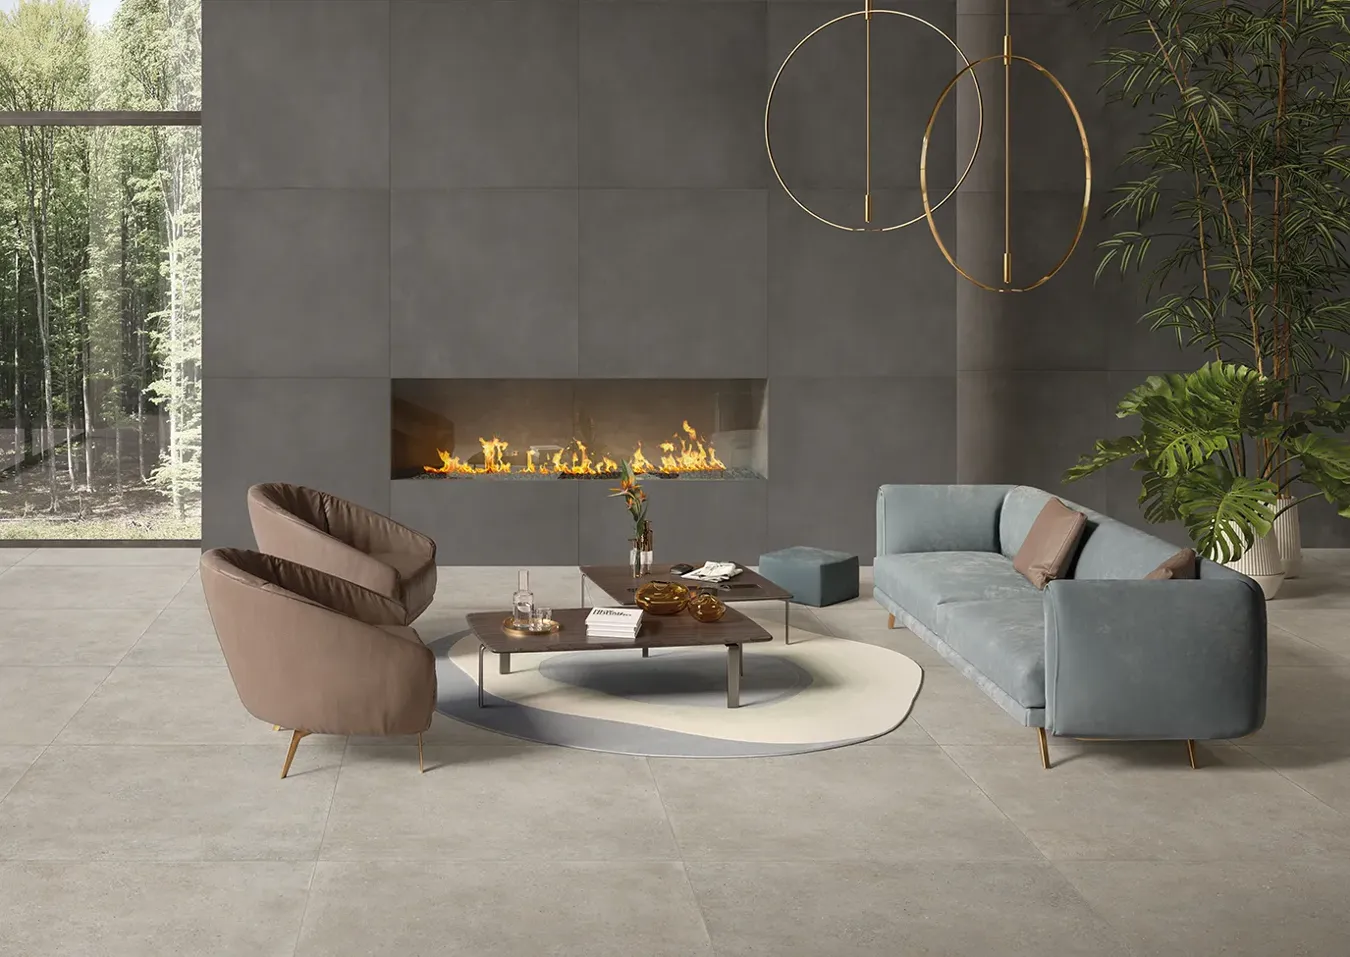 Luxurious living room with a fireplace clad in metal and concrete effect tiles, elegant furniture, and gold details.